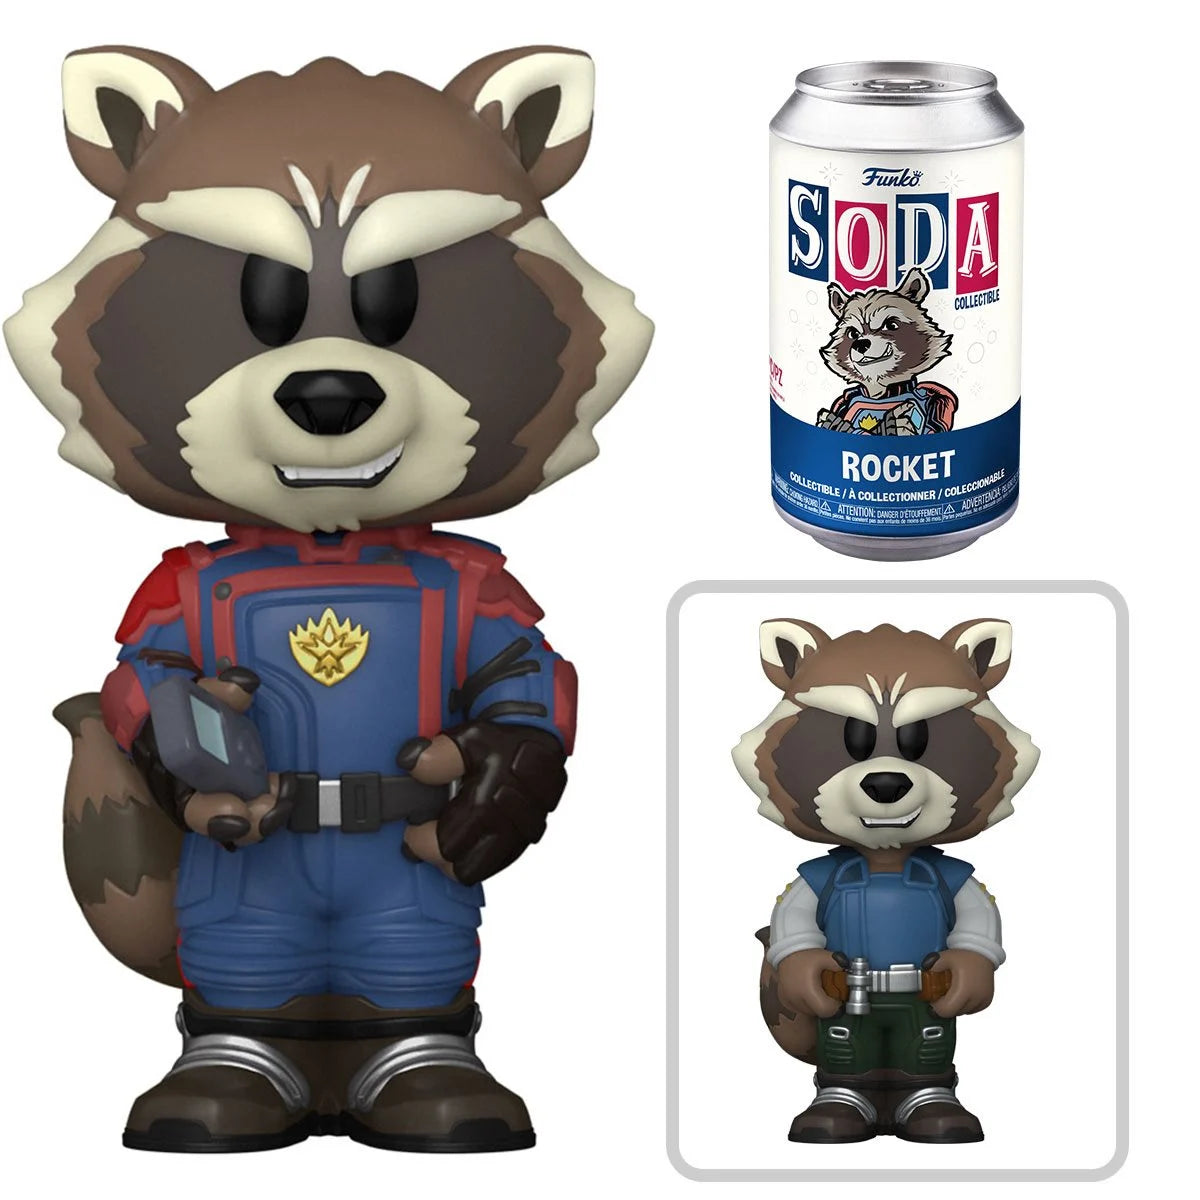 Rocket Guardians of the Galaxy Volume 3 Funko Vinyl Soda w/ Chance of chase!